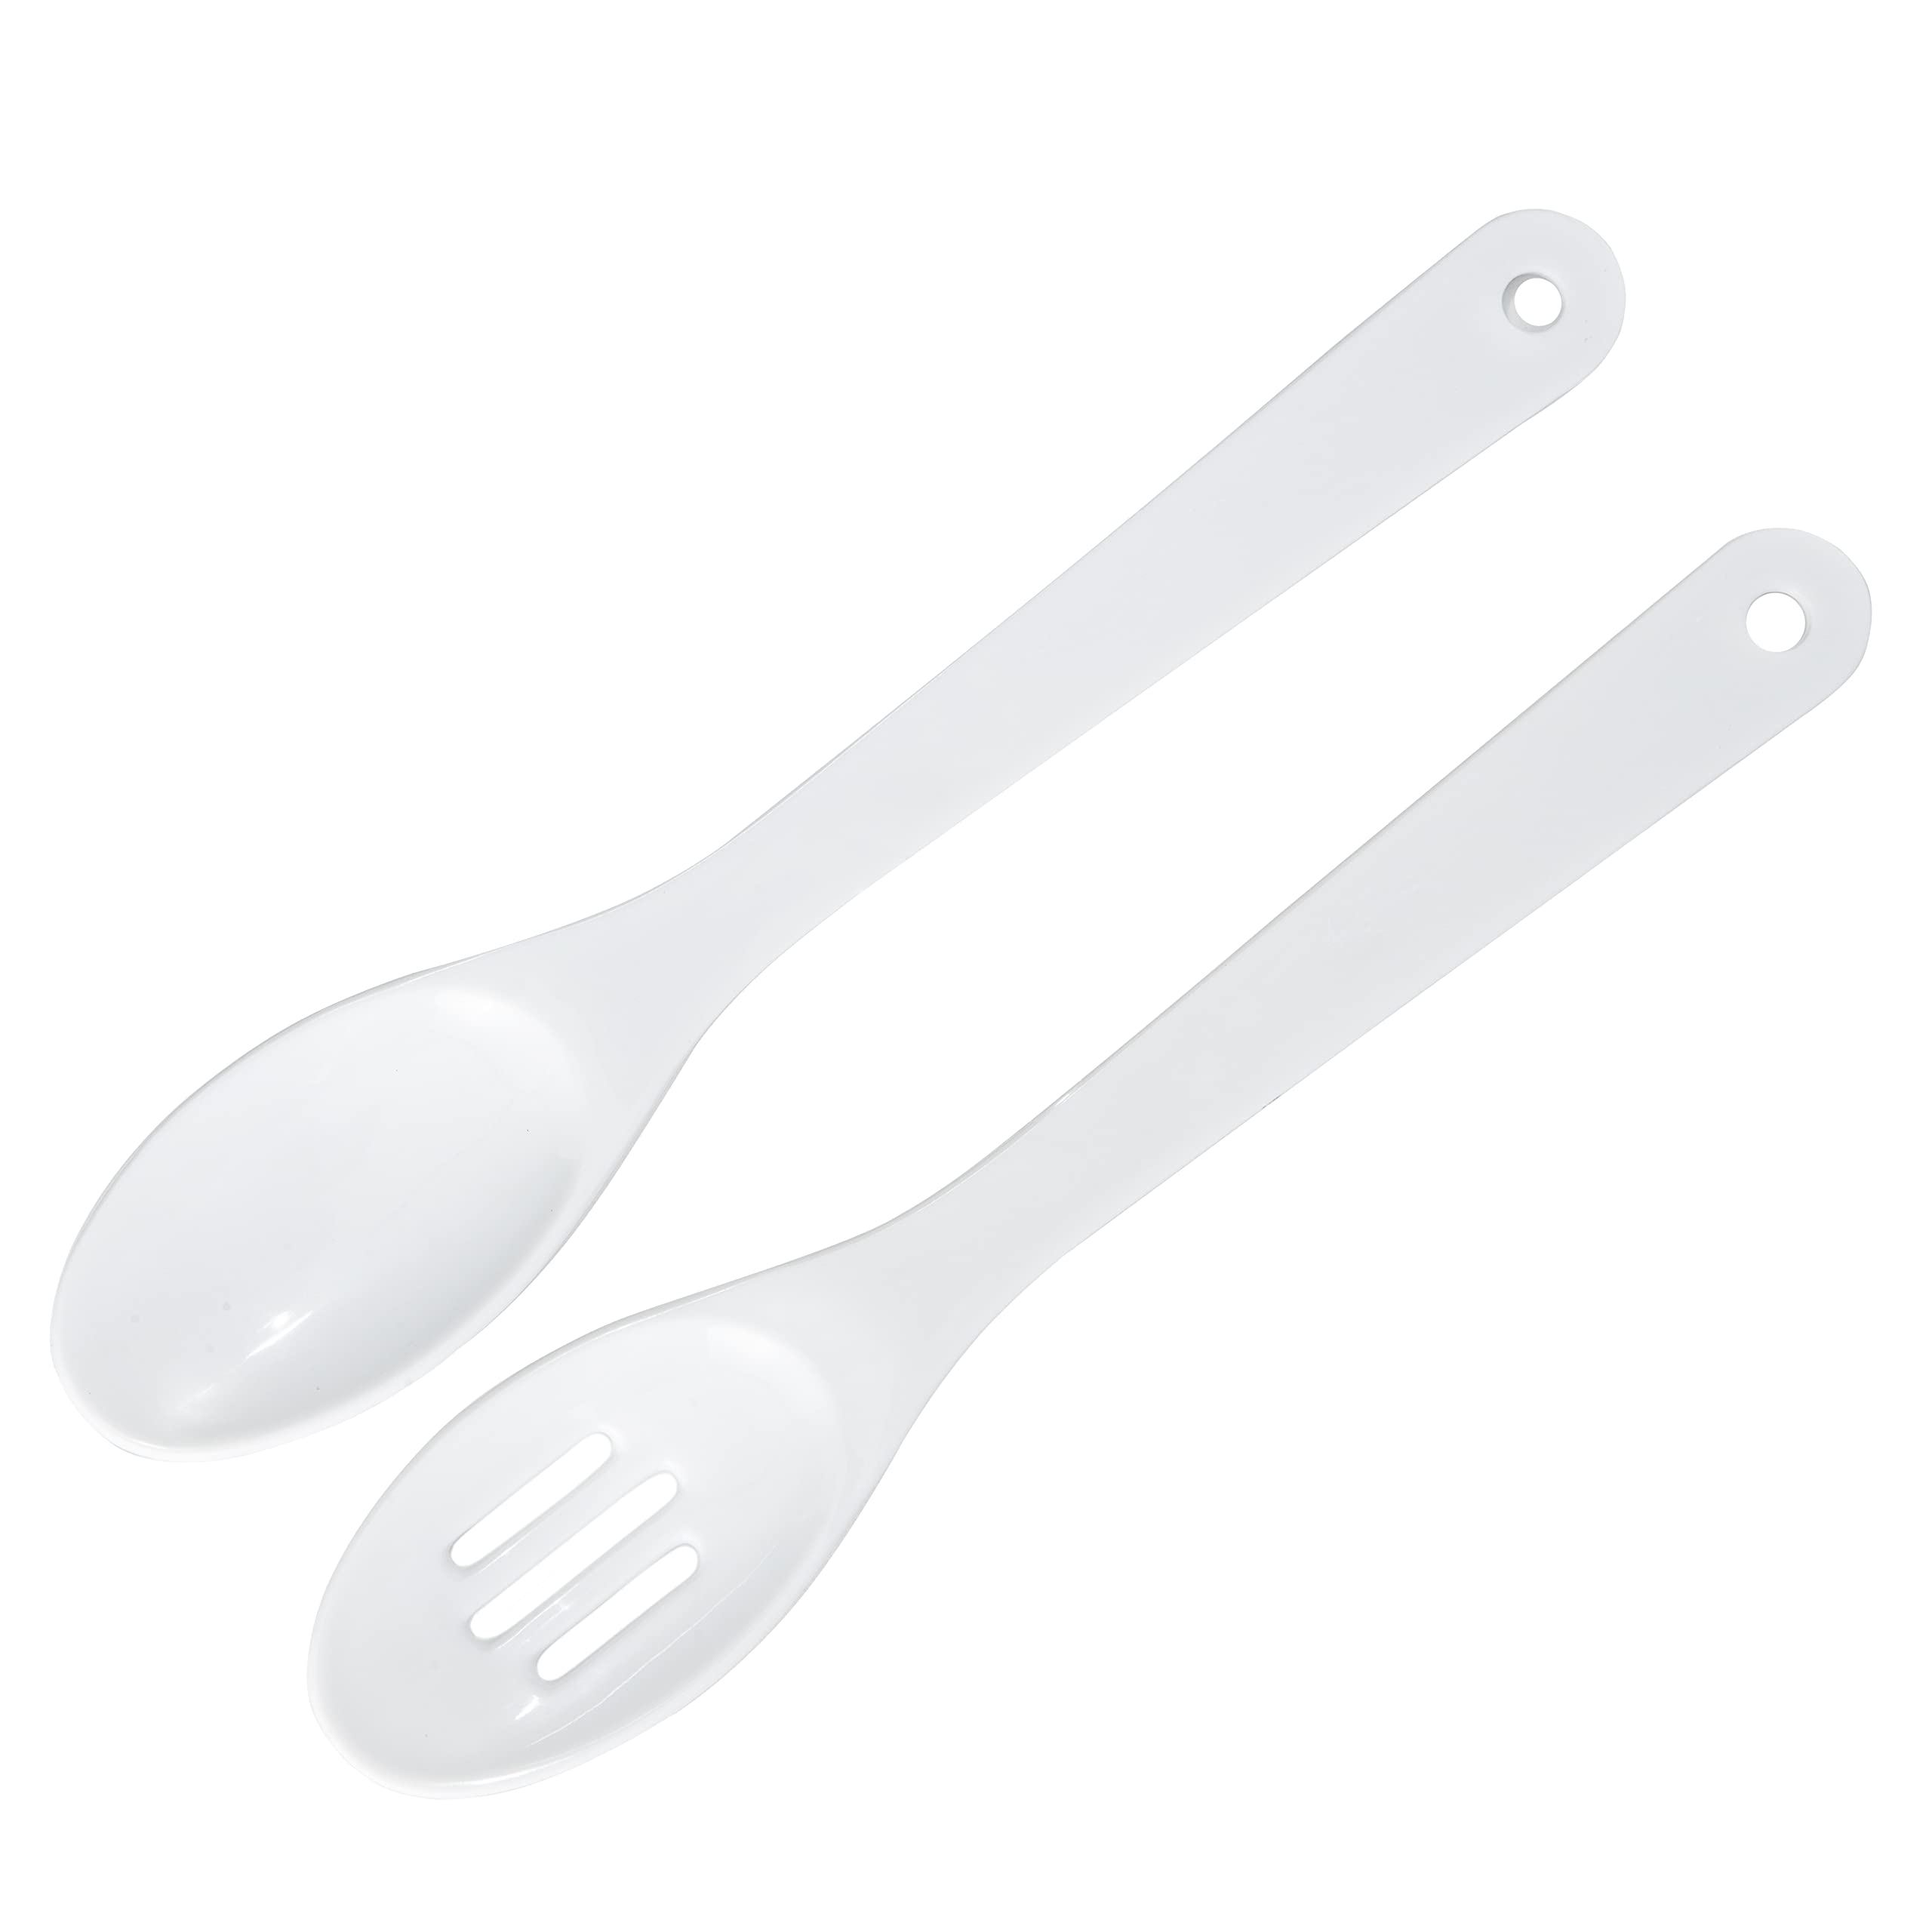 ''Chef CRAFT Select Plastic Poly Spoon, 11.5 inch 2 piece set, White''